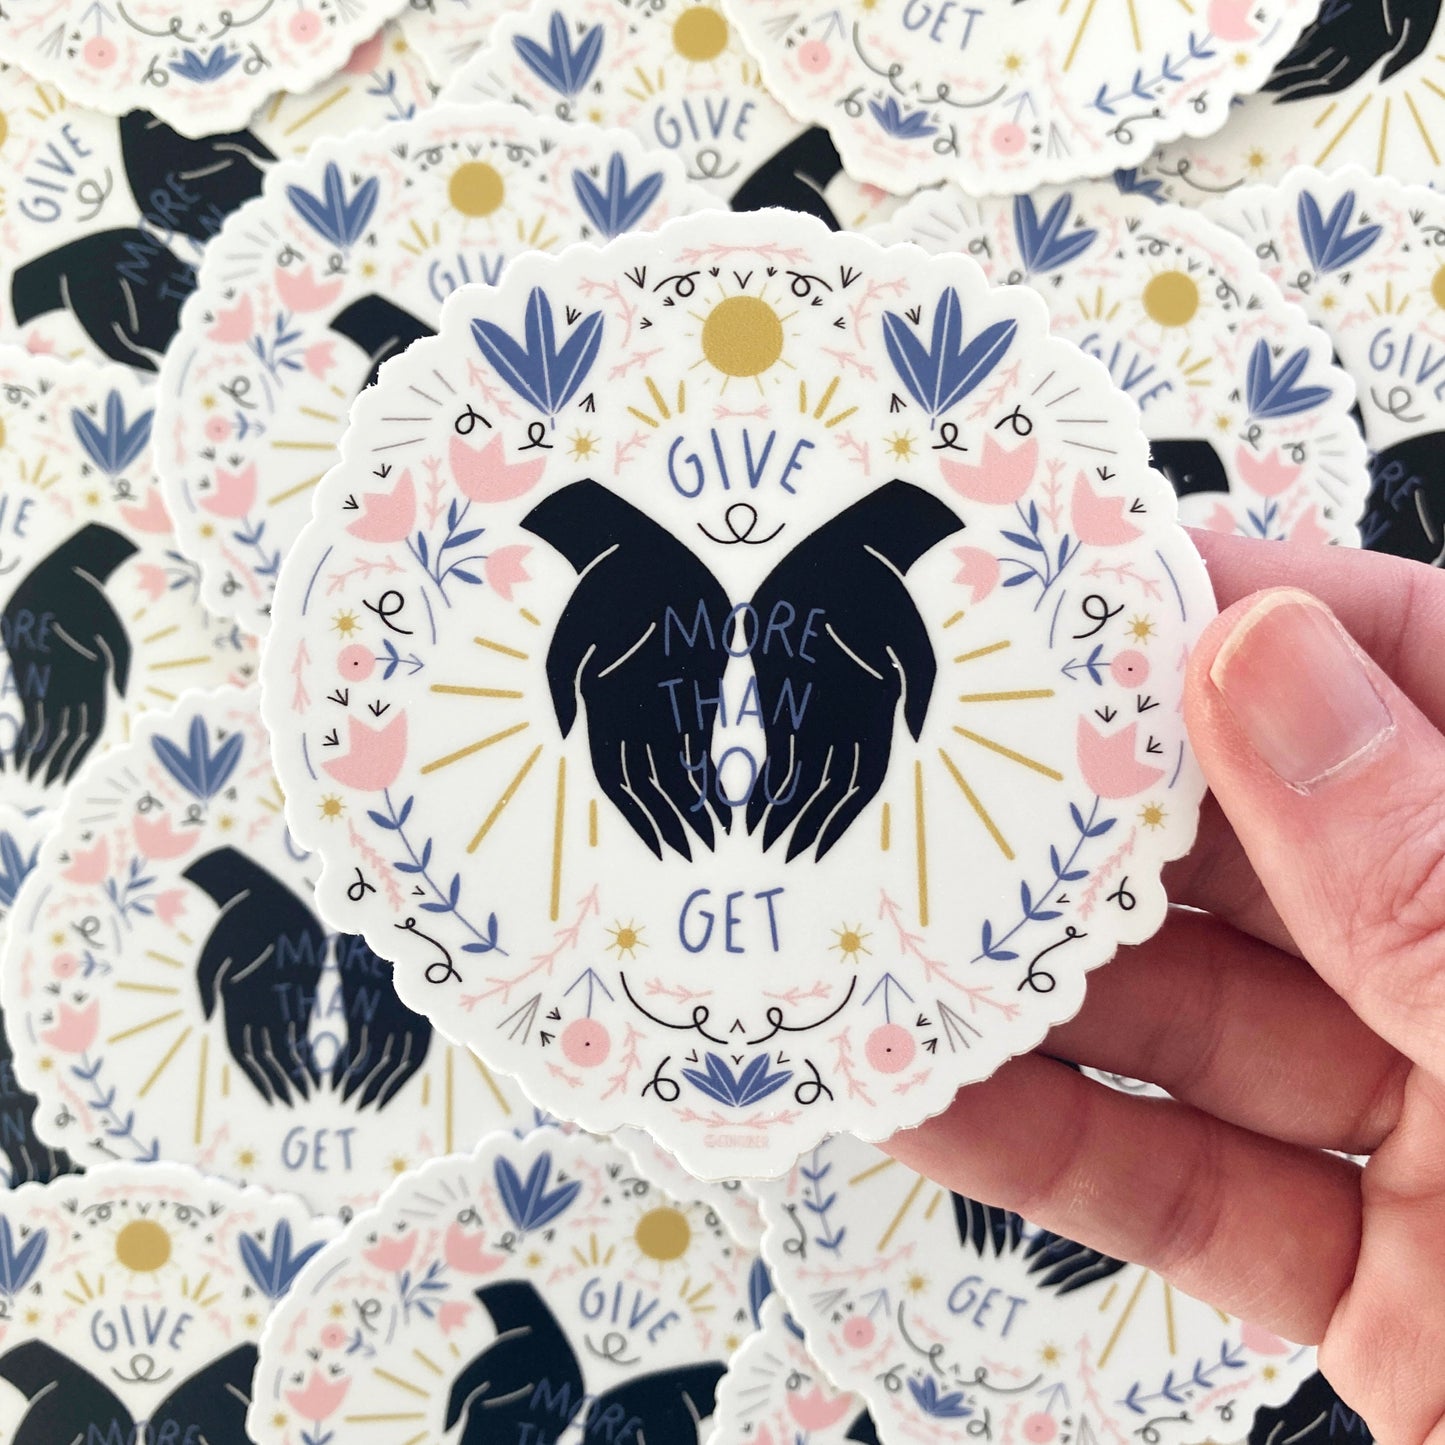 Give More Than You Get Sticker